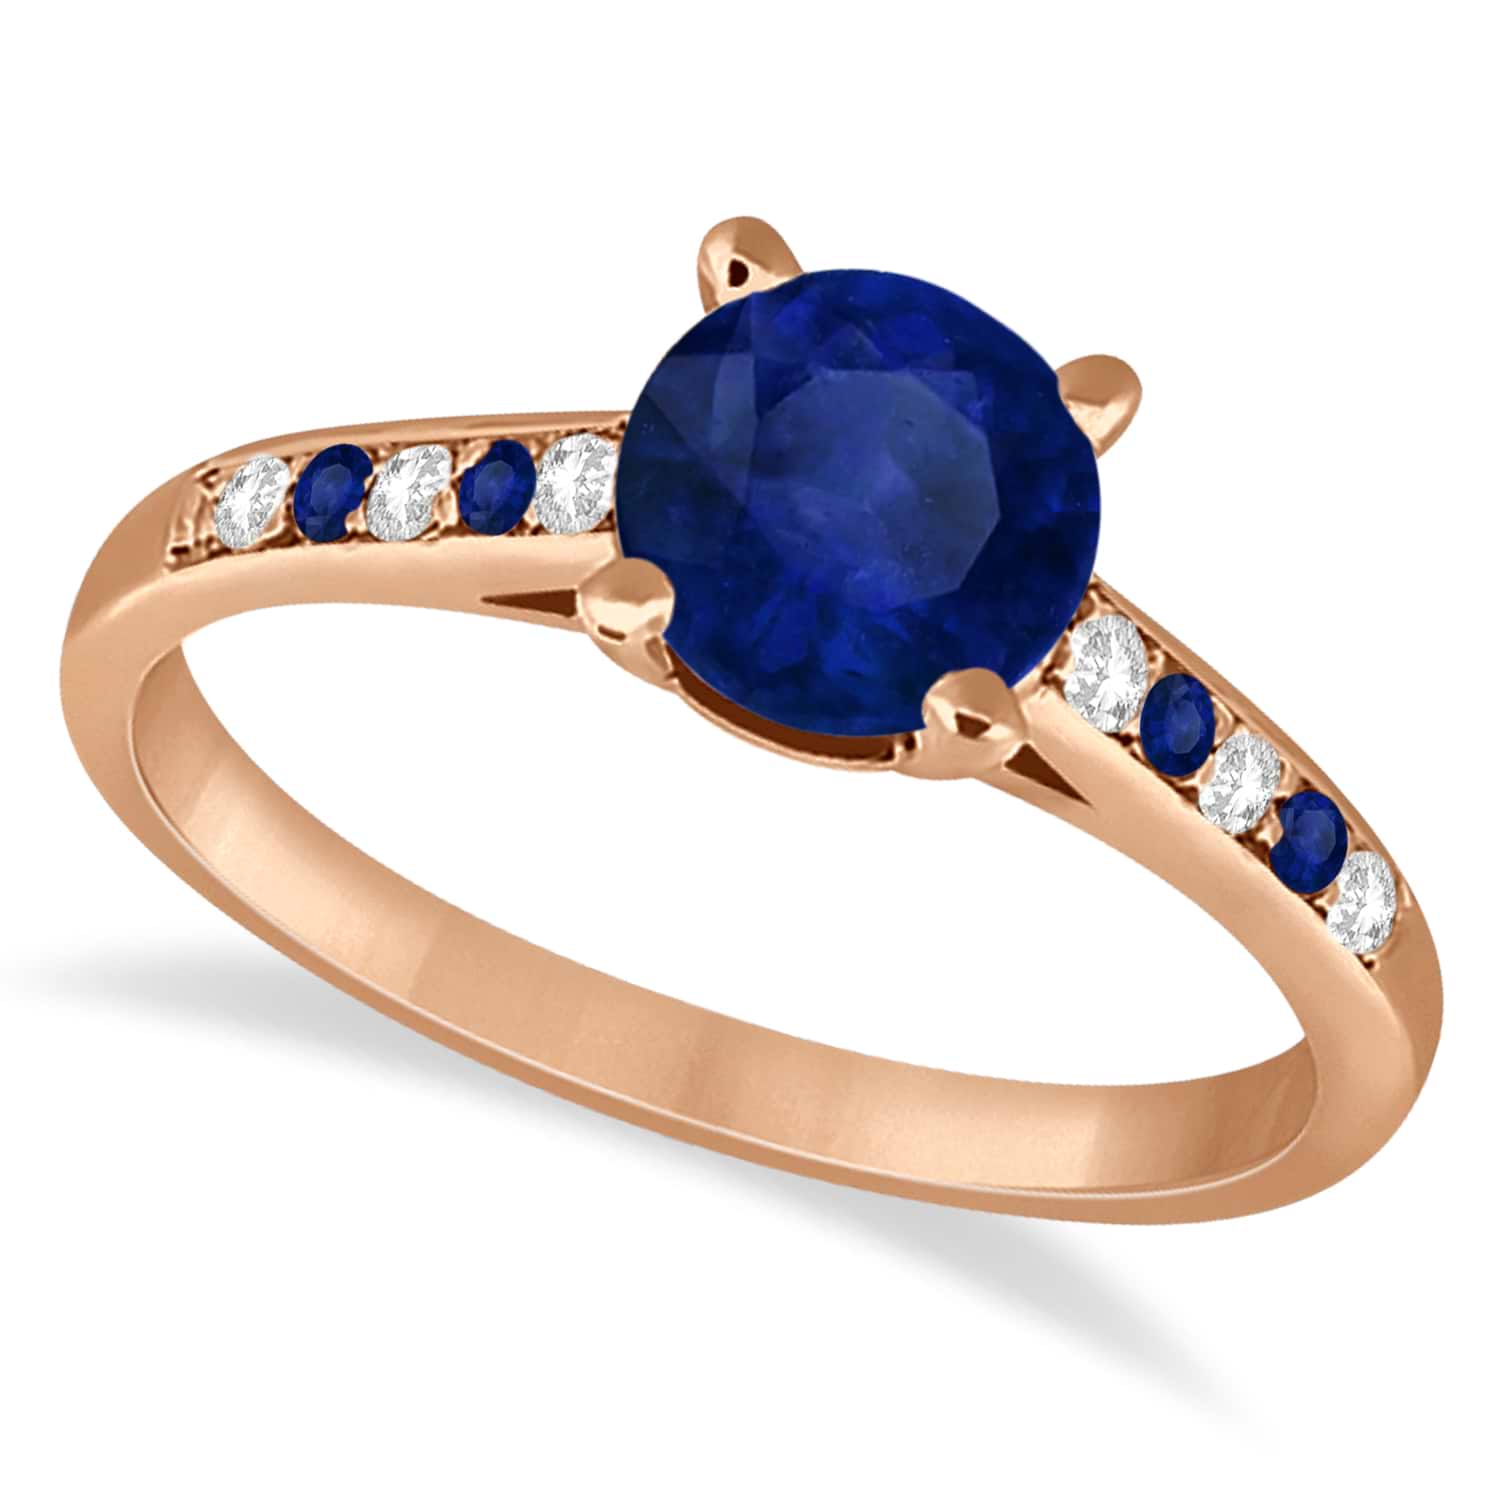 Cathedral Blue Sapphire & Diamond Engagement Ring 14k Rose Gold (1.20ct)